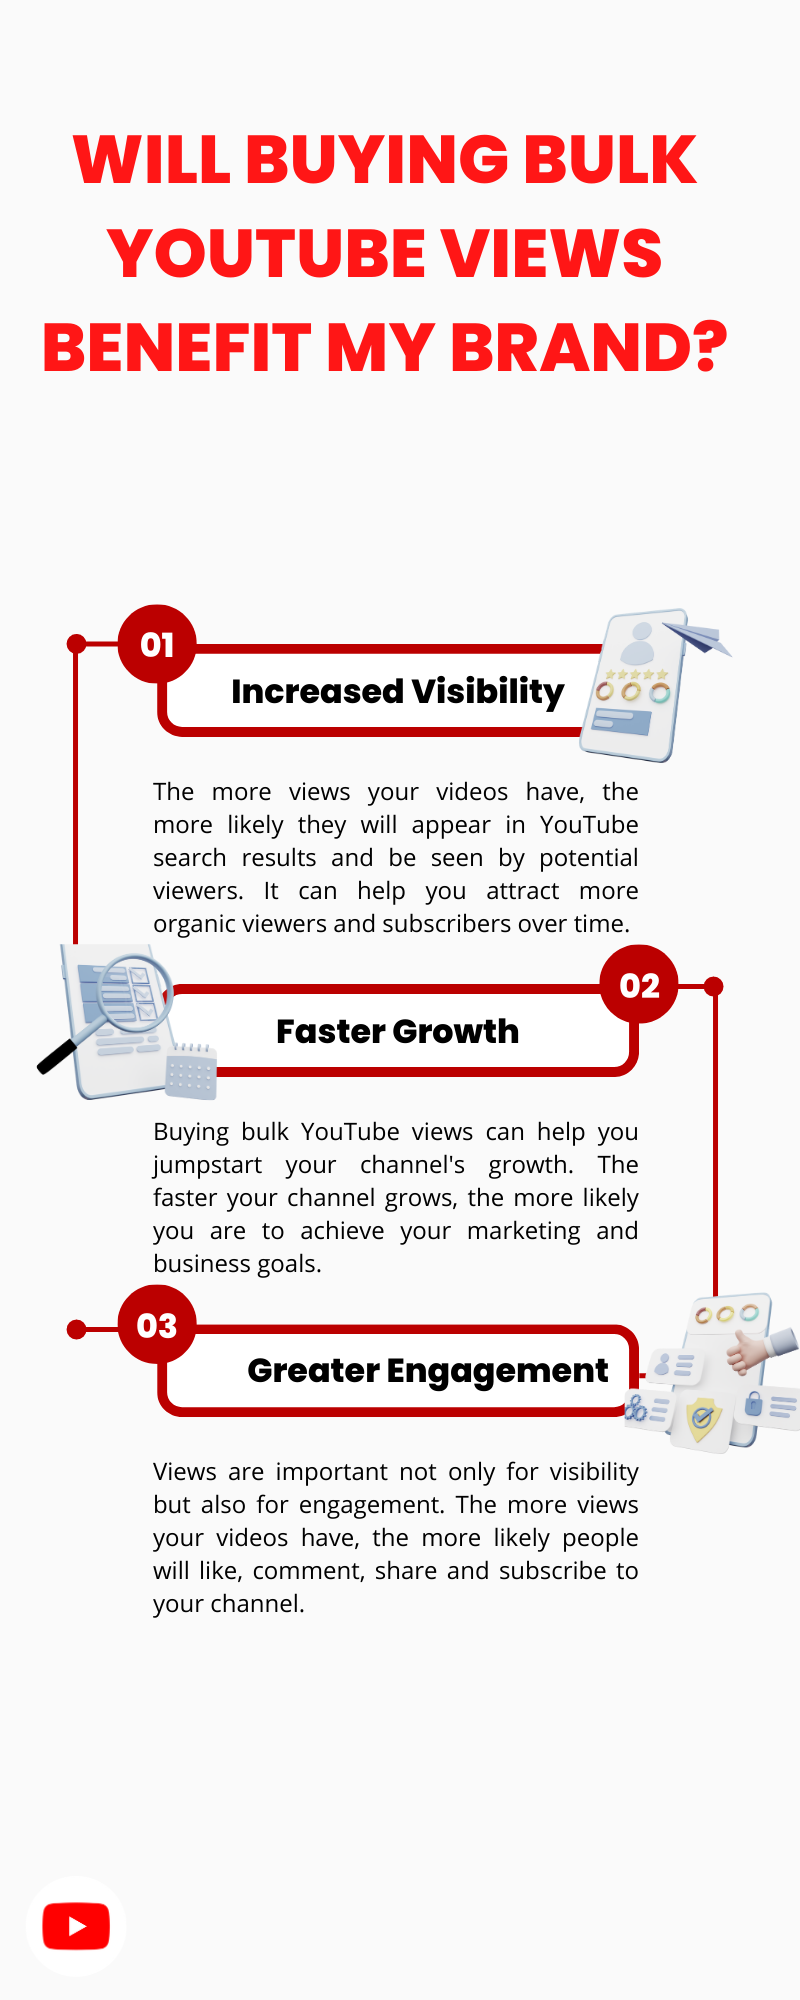 Benefits of Buying YT Views In Bulk On Your Brand